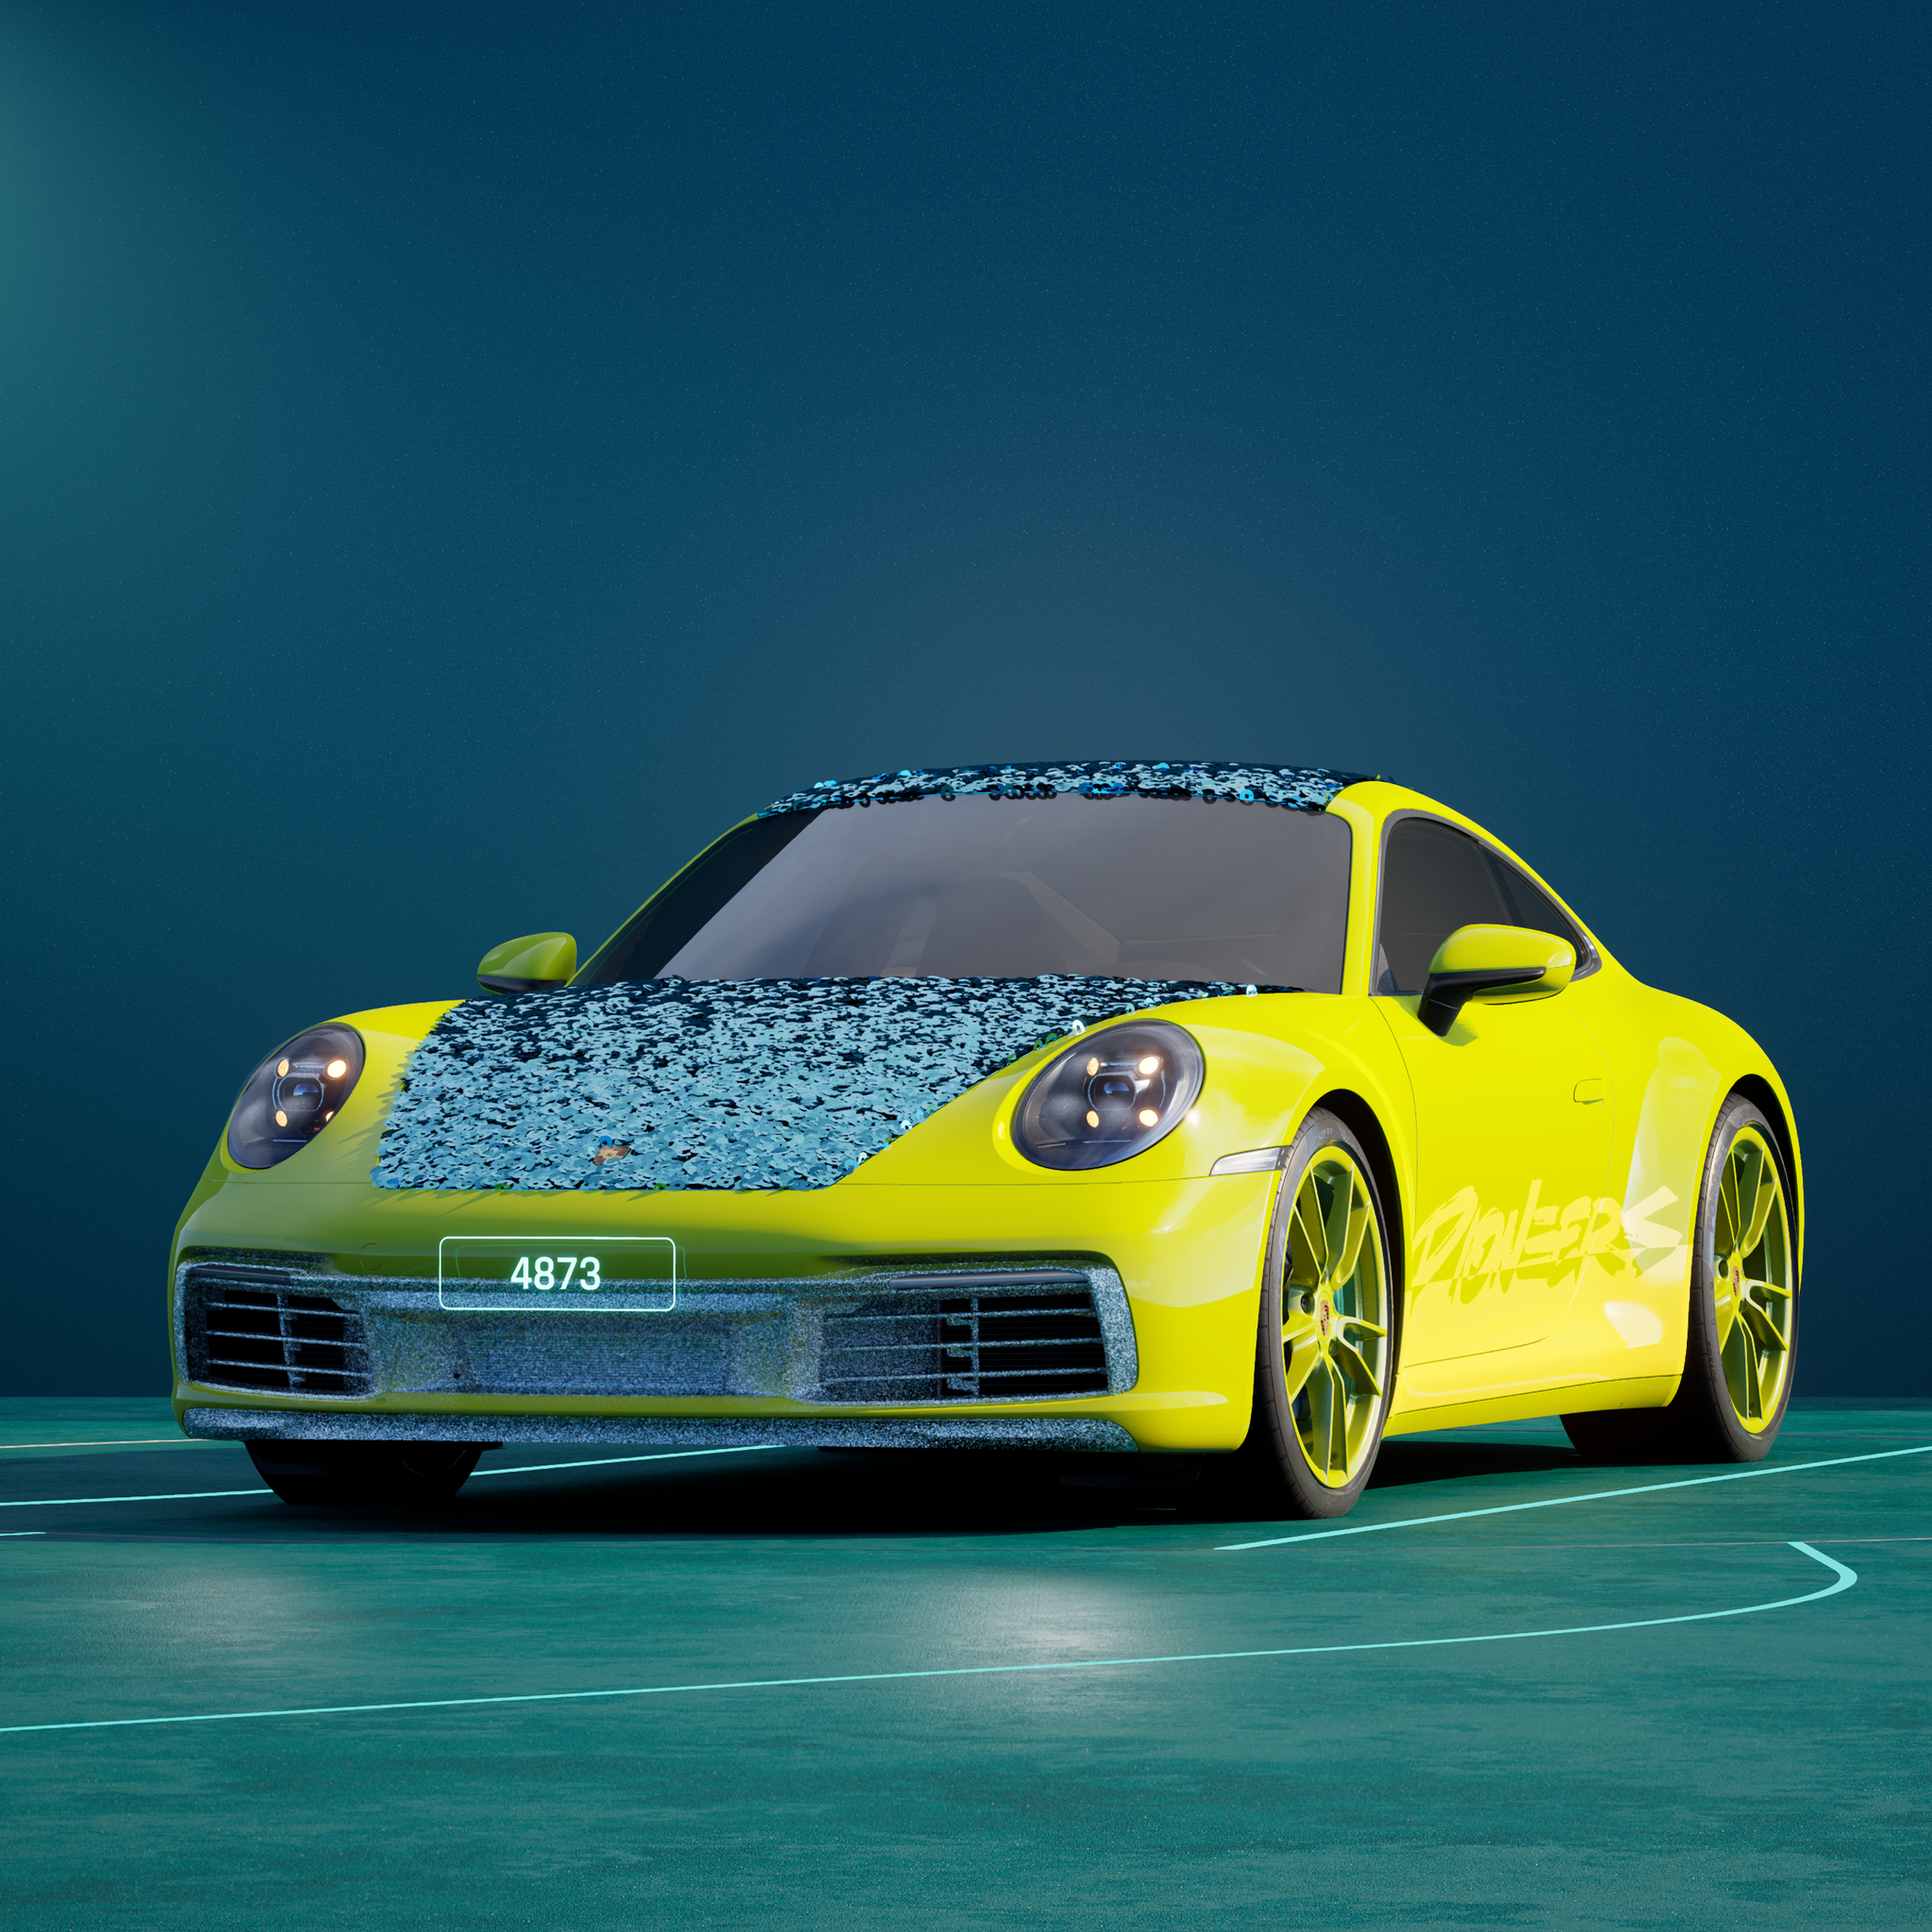 The PORSCHΞ 911 4873 image in phase